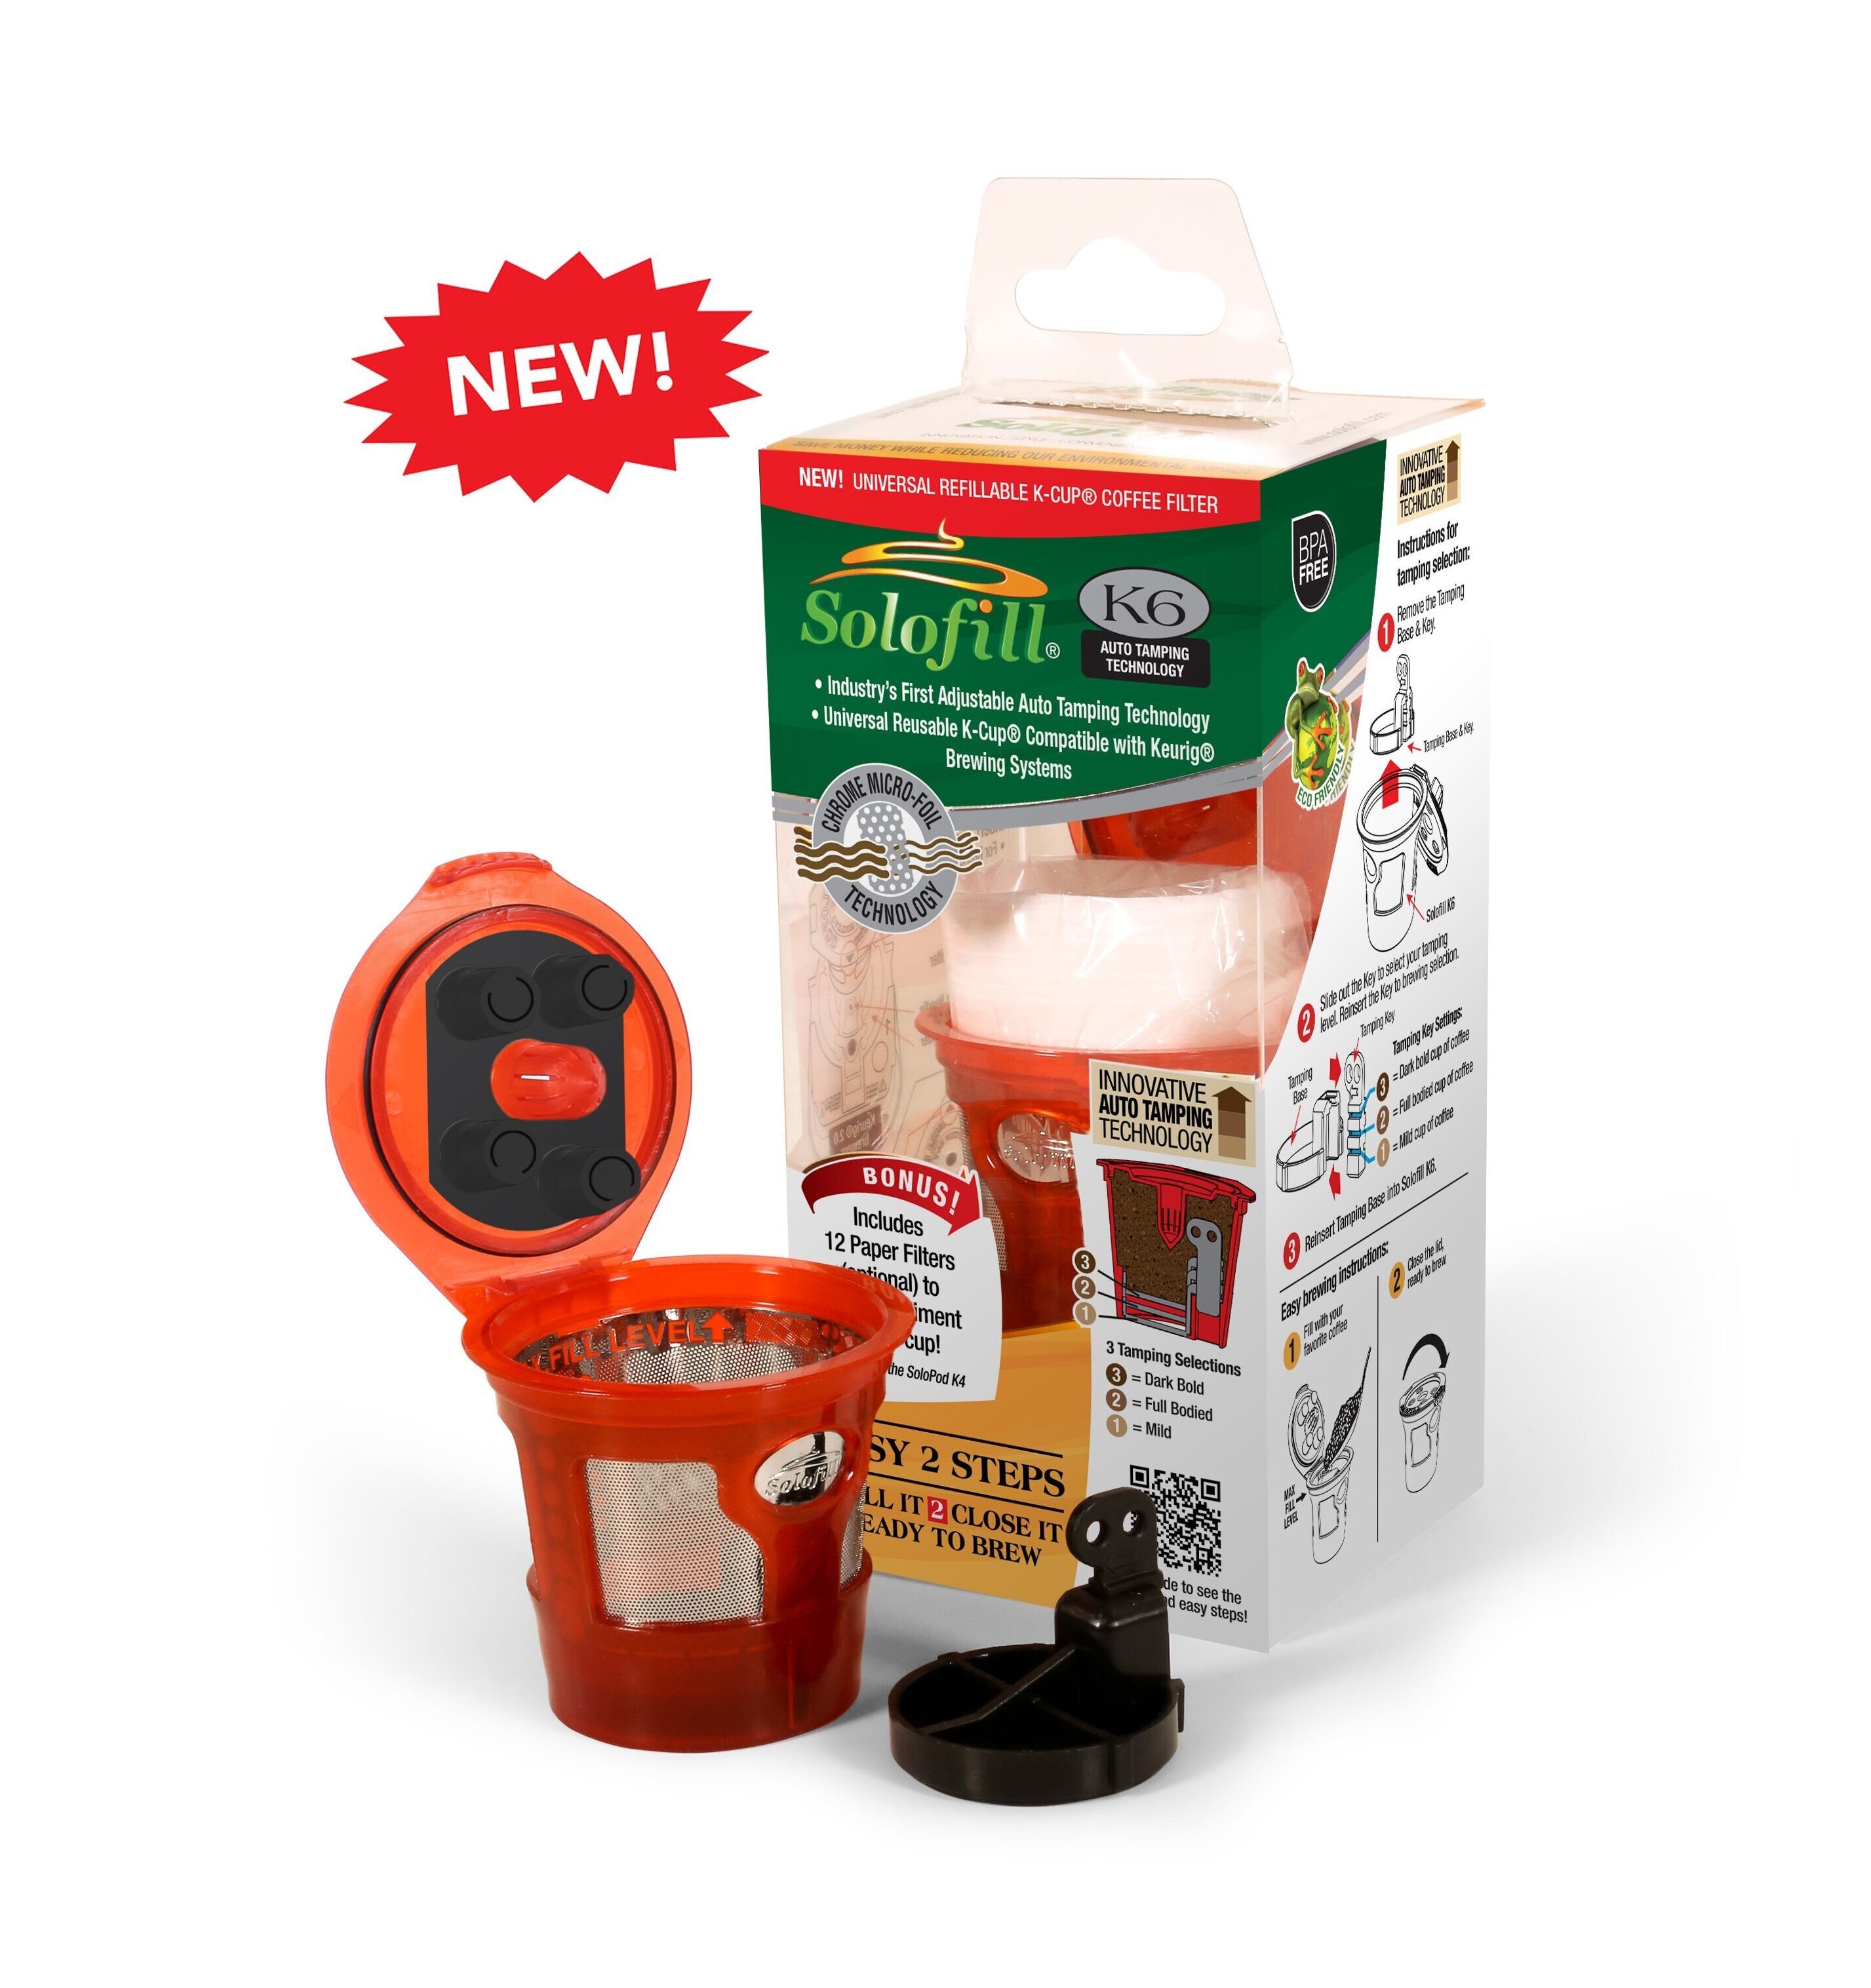 New! Solofill SoloGrind 2-in-1 Automatic Single Serve Coffee Burr